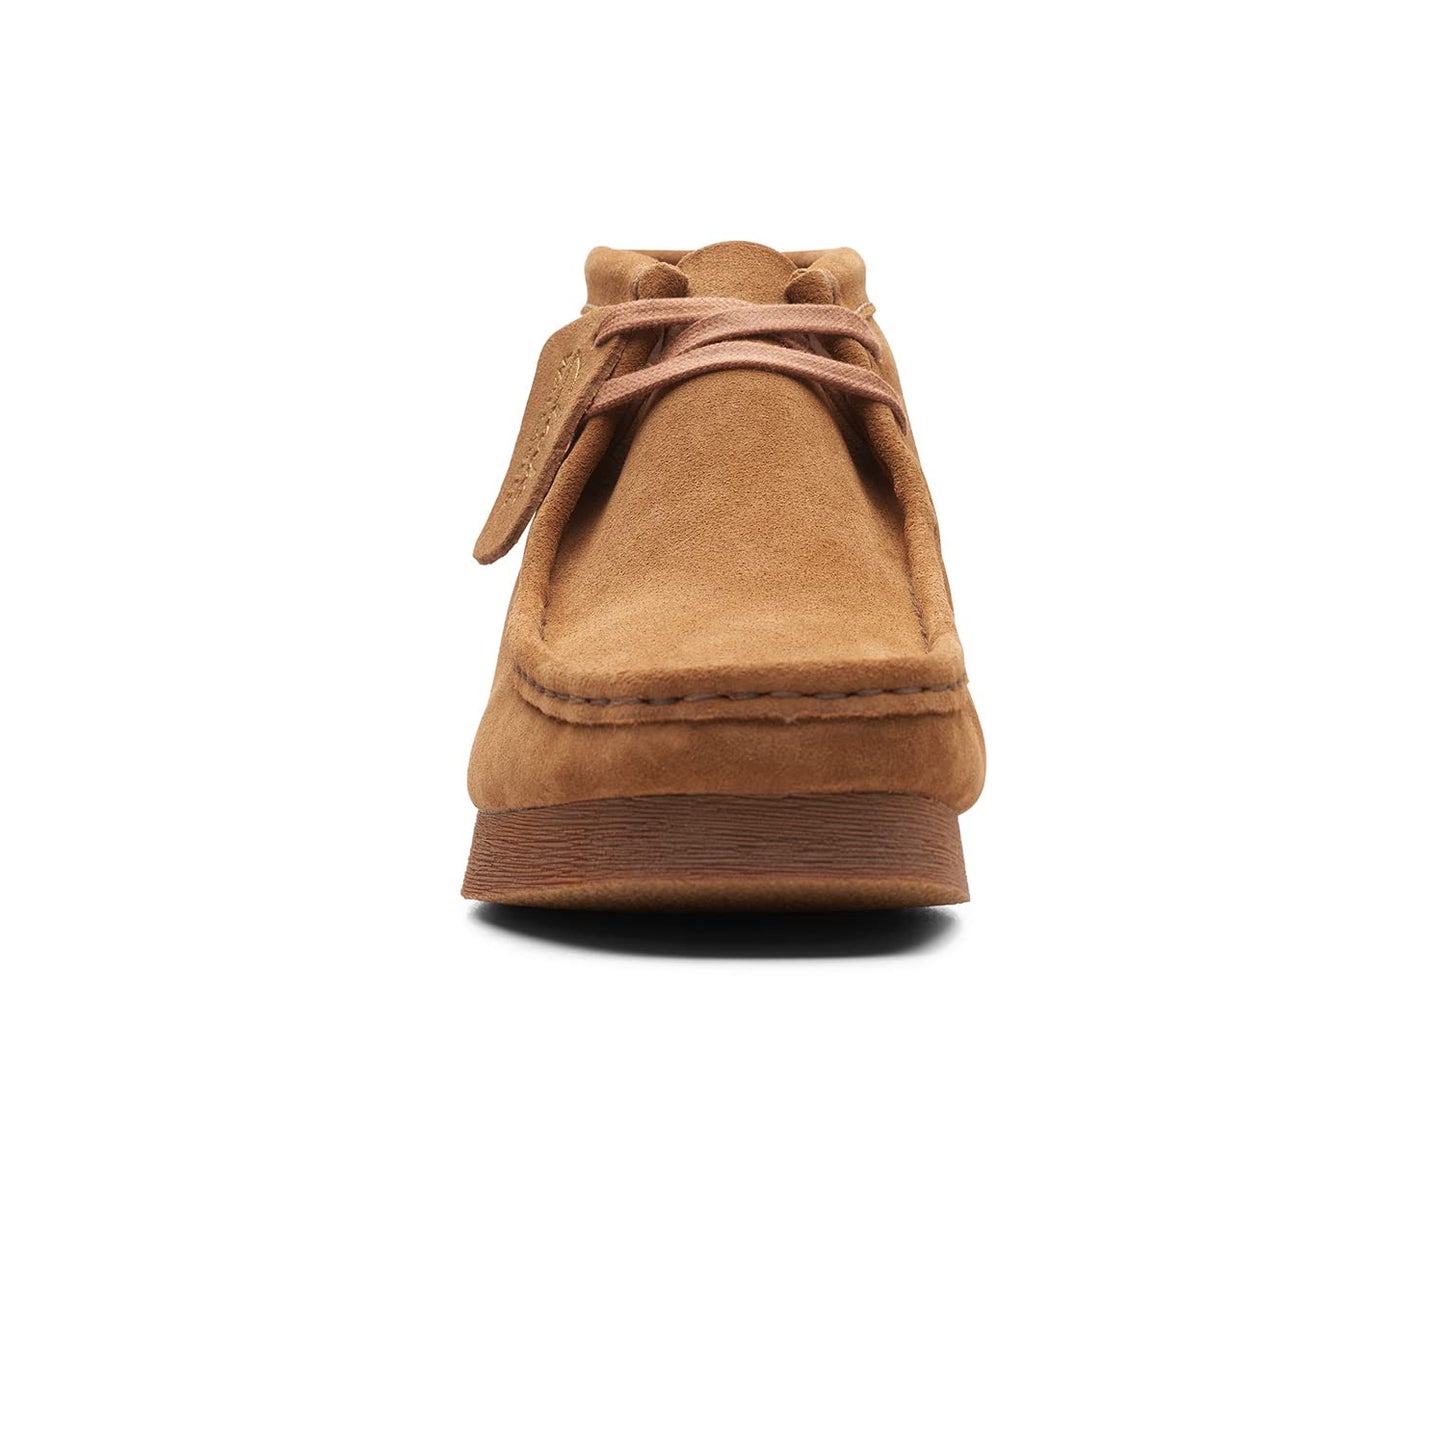 Clarks Wallabee Boot2 Brown SDE 